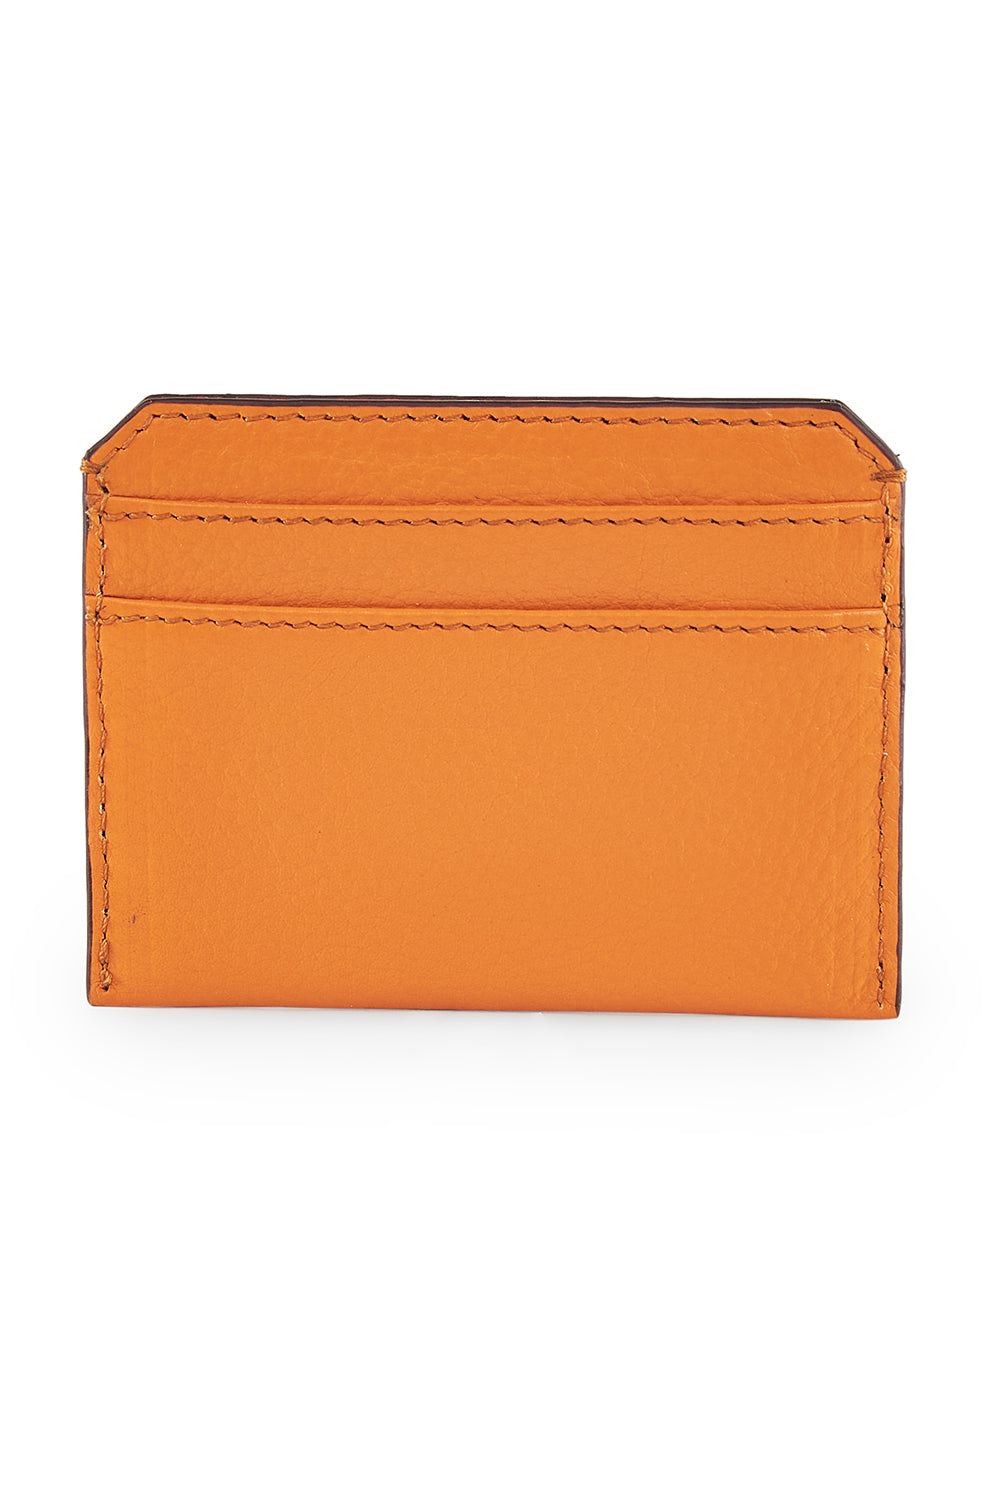 Shop Now & Upgrade Your Everyday Style with Flynn Card Case | Lodis 